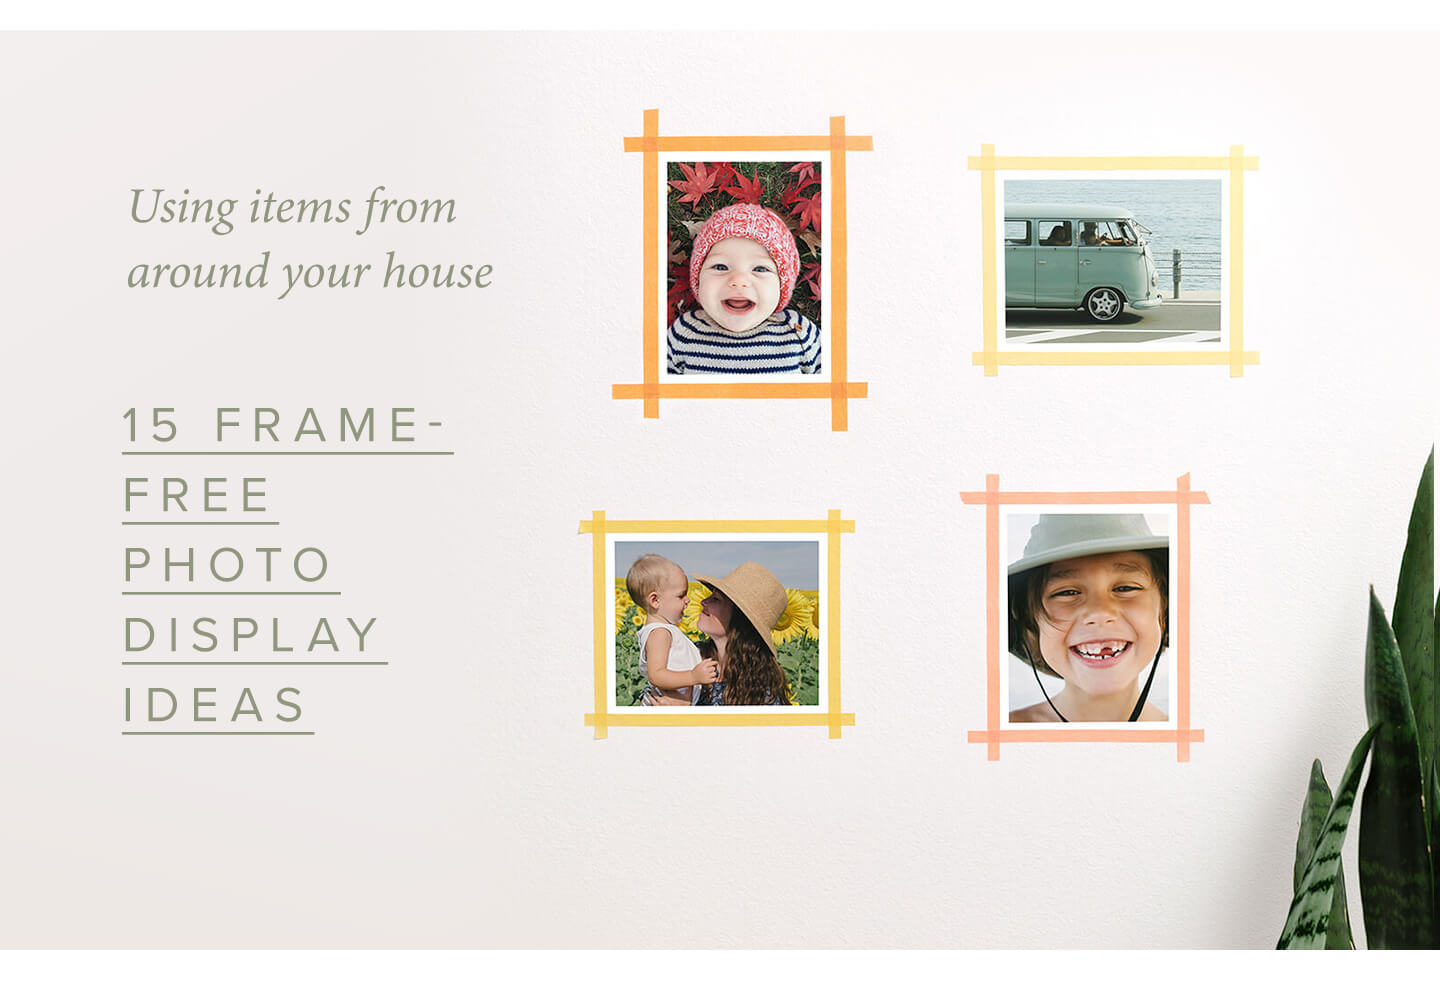 Using items from around your house | 15 Frame-Free Photo Display Ideas